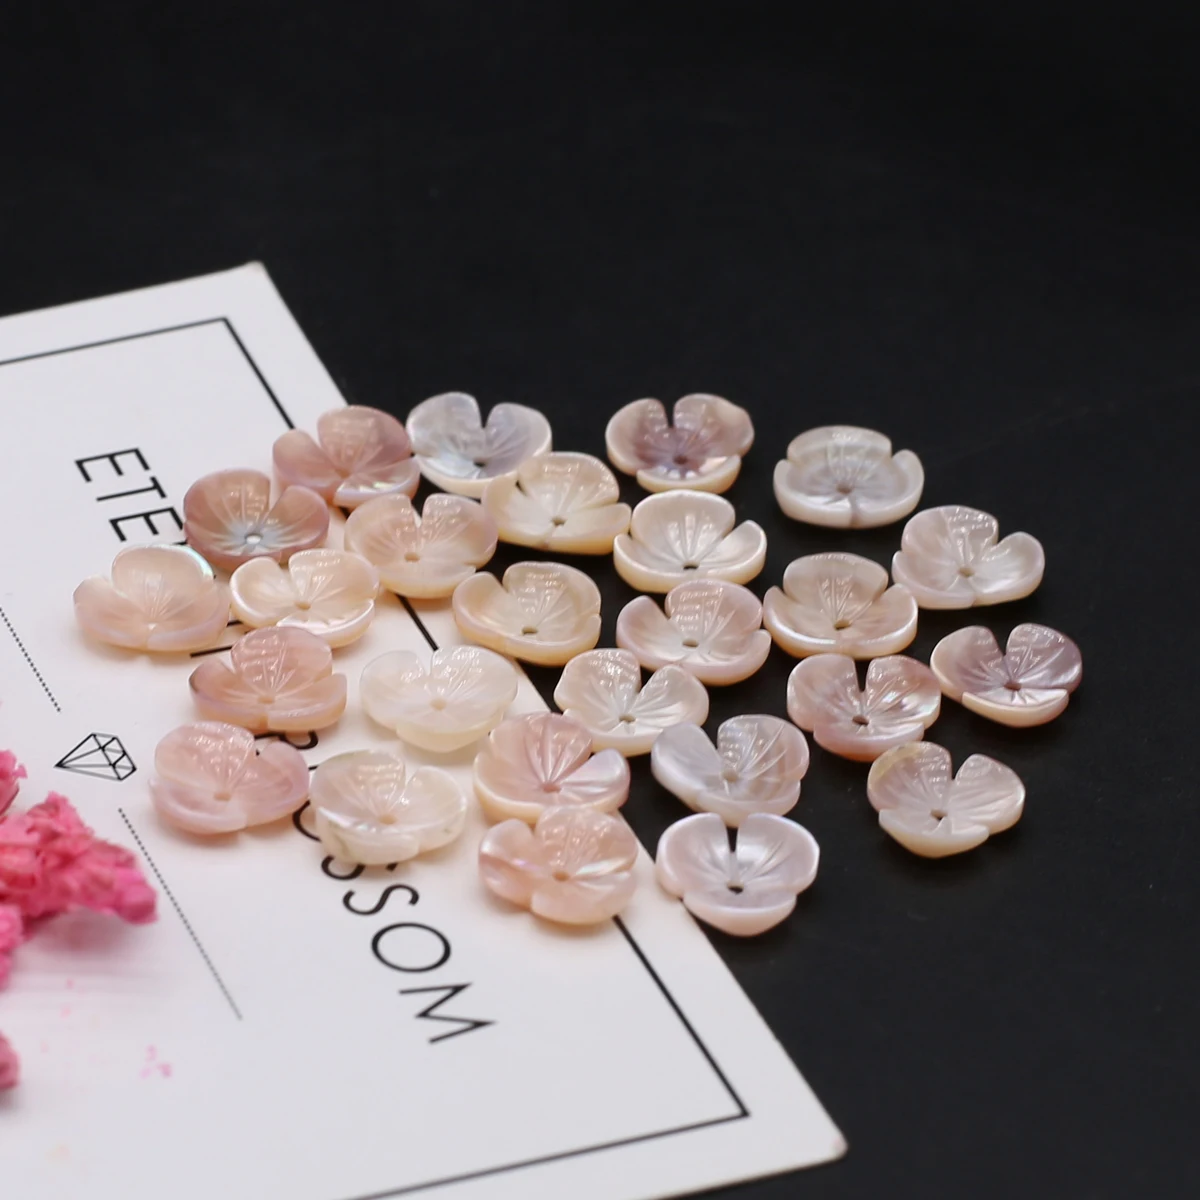 2Pcs Natural Shell Isolation Beads Clover Shell Flower Beads For Jewelry Making DIY Necklace Bracelet Earrings Accessory